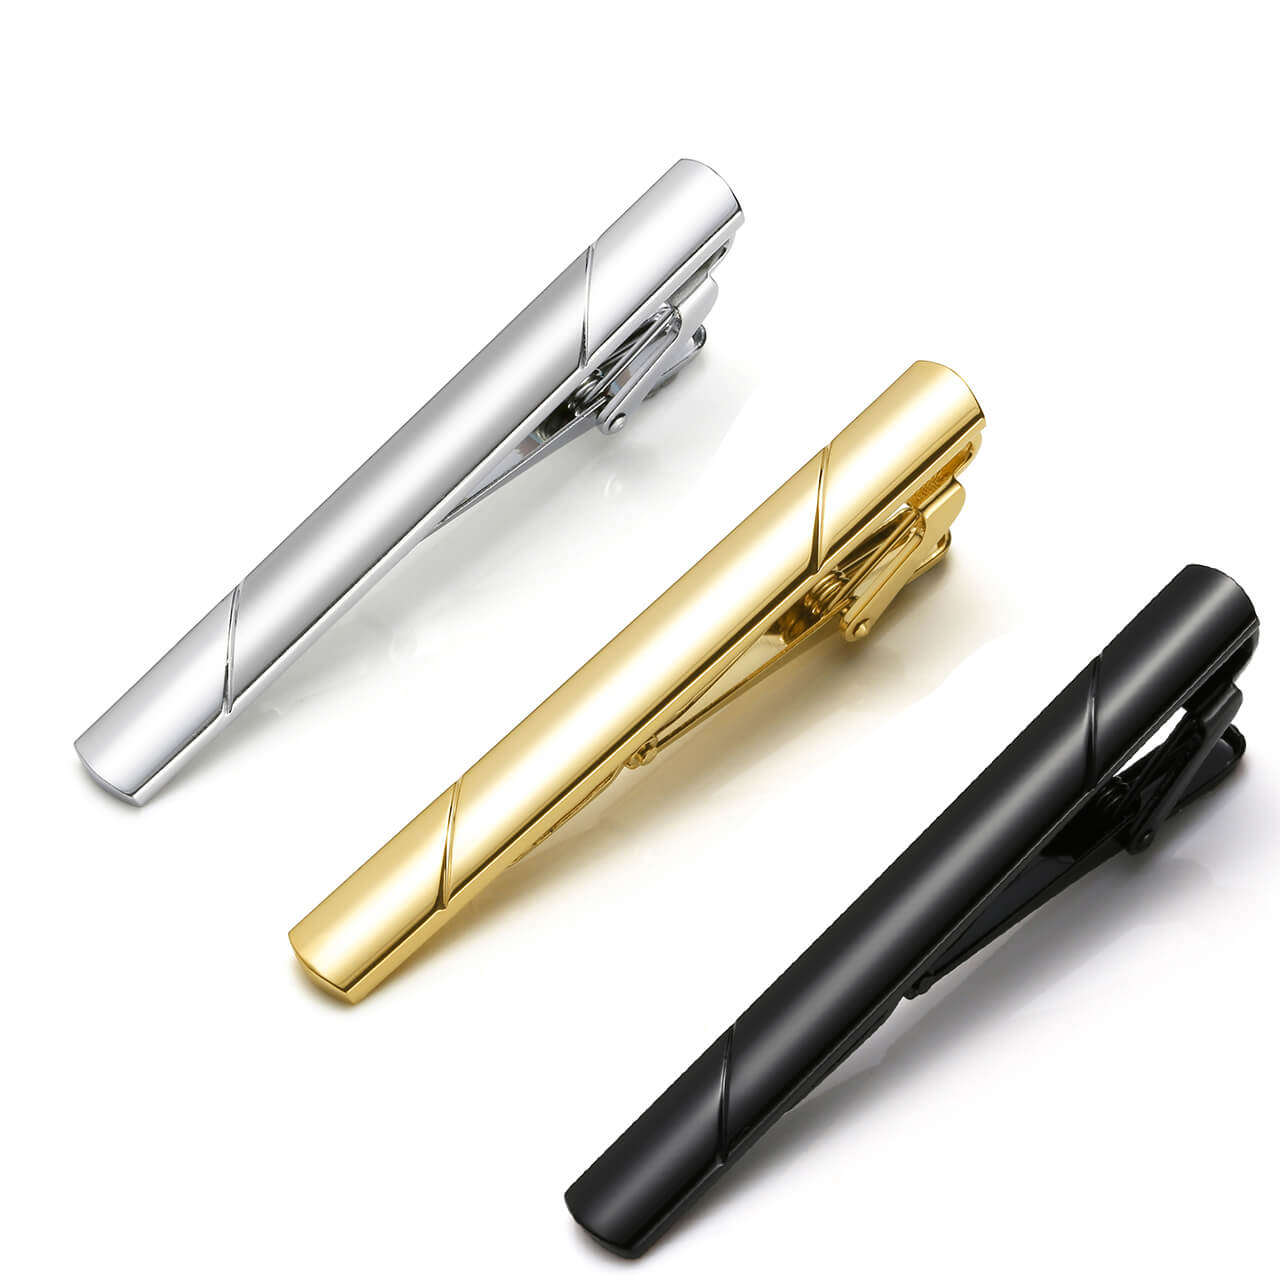 jovivi 3pcs mens bussiness classic tie bar clip gift for father's day